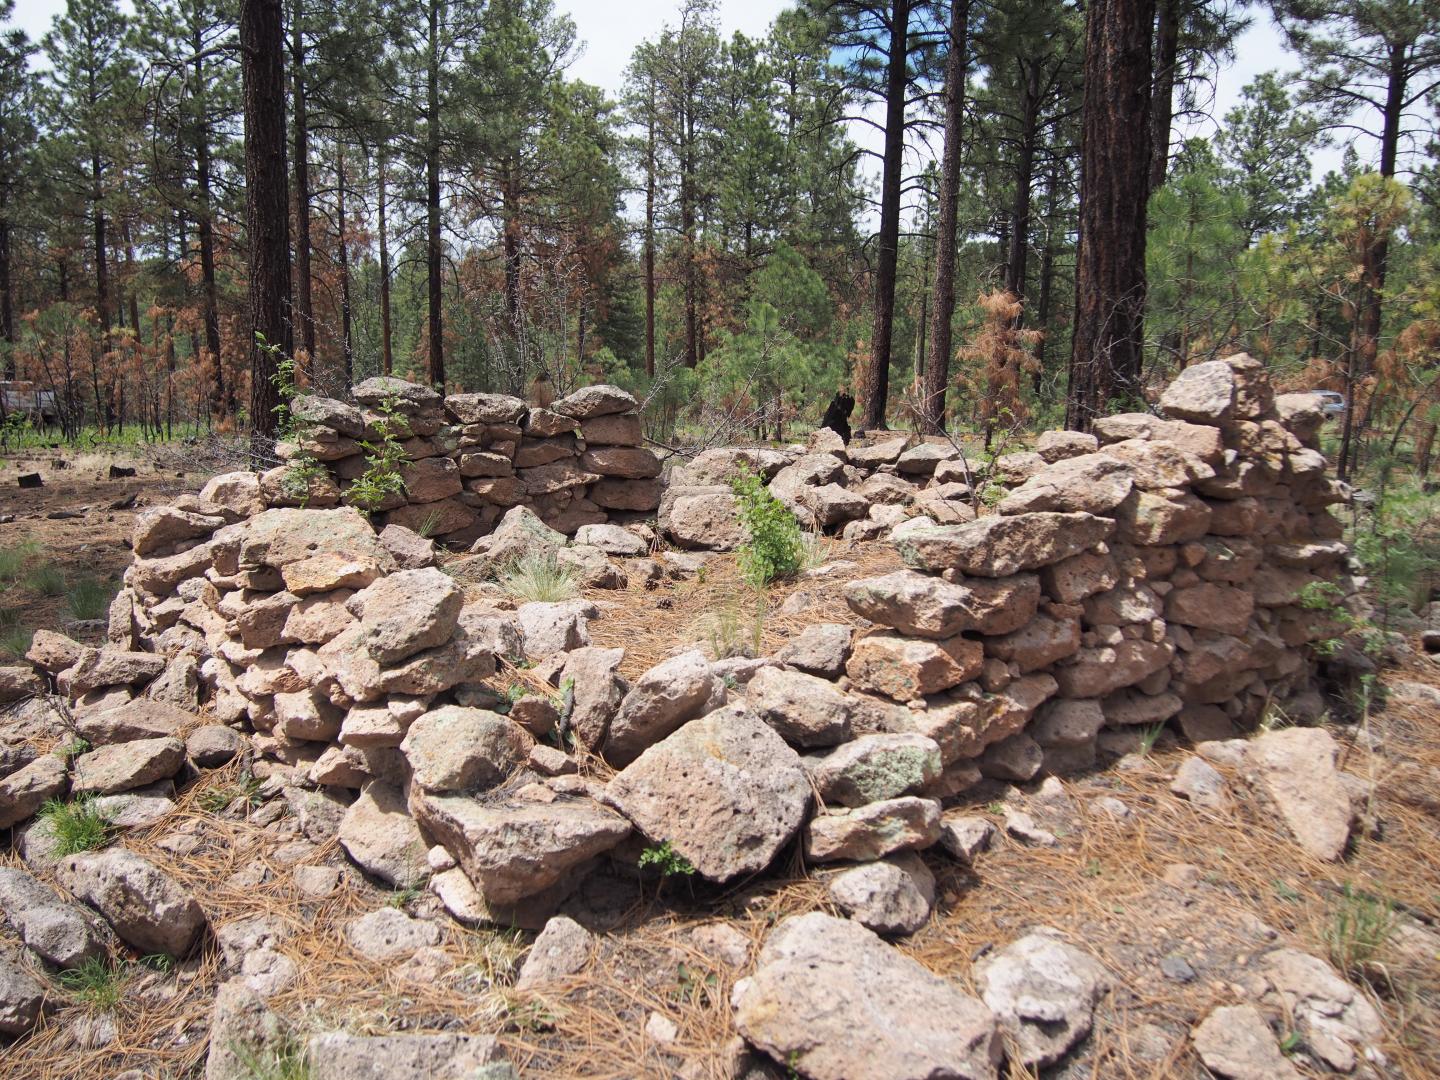 Archaeological remains of a "fieldhouse" in Jemez ponderosa pine forests.